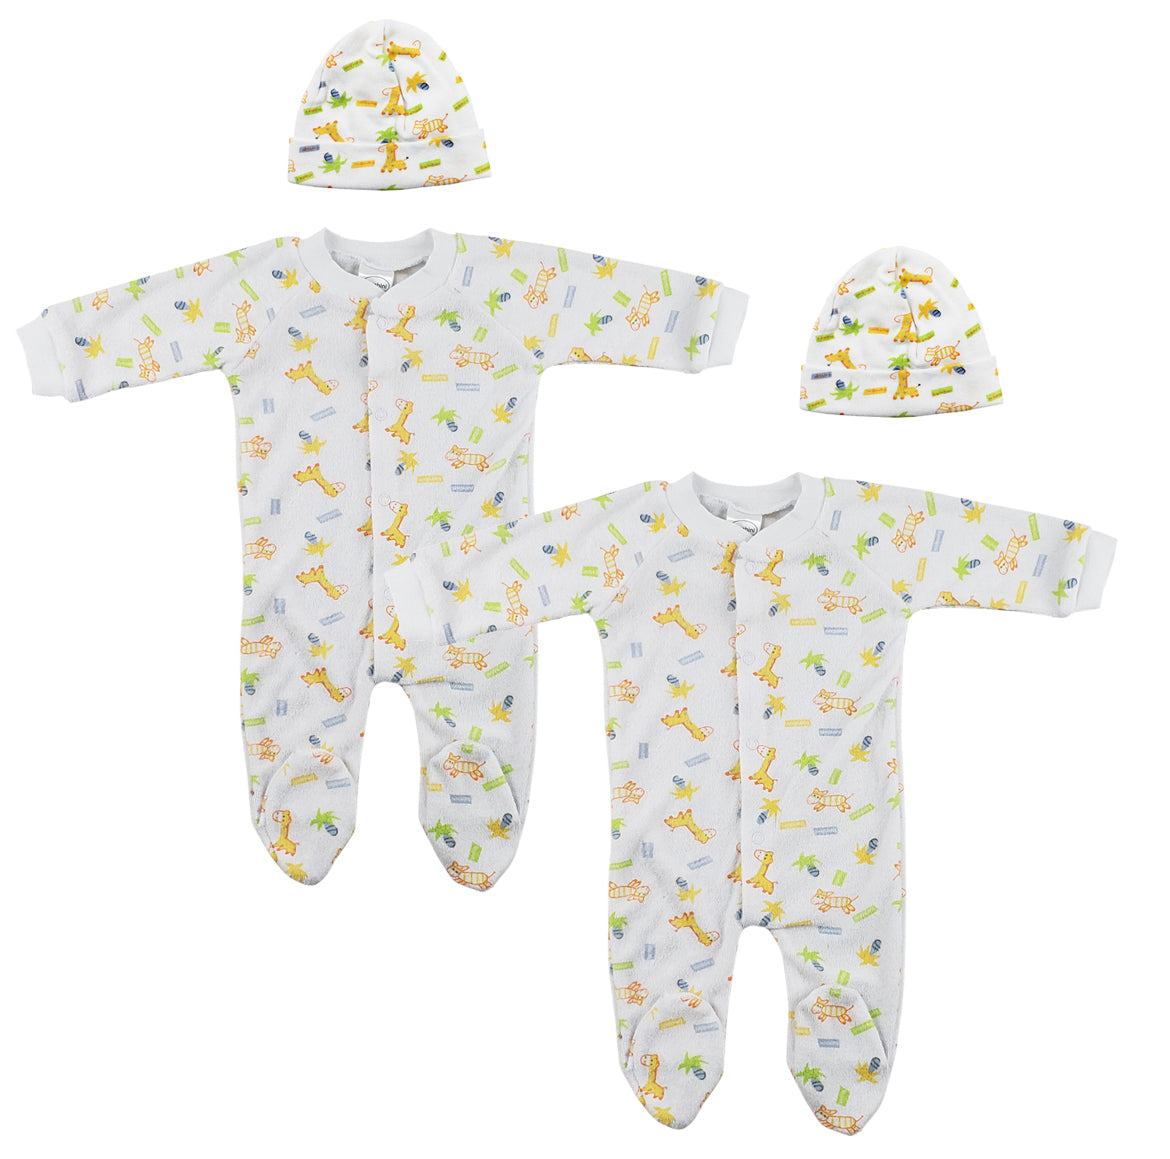 Unisex Closed-toe Sleep & Play with Caps (Pack of 4 ) NC_0710